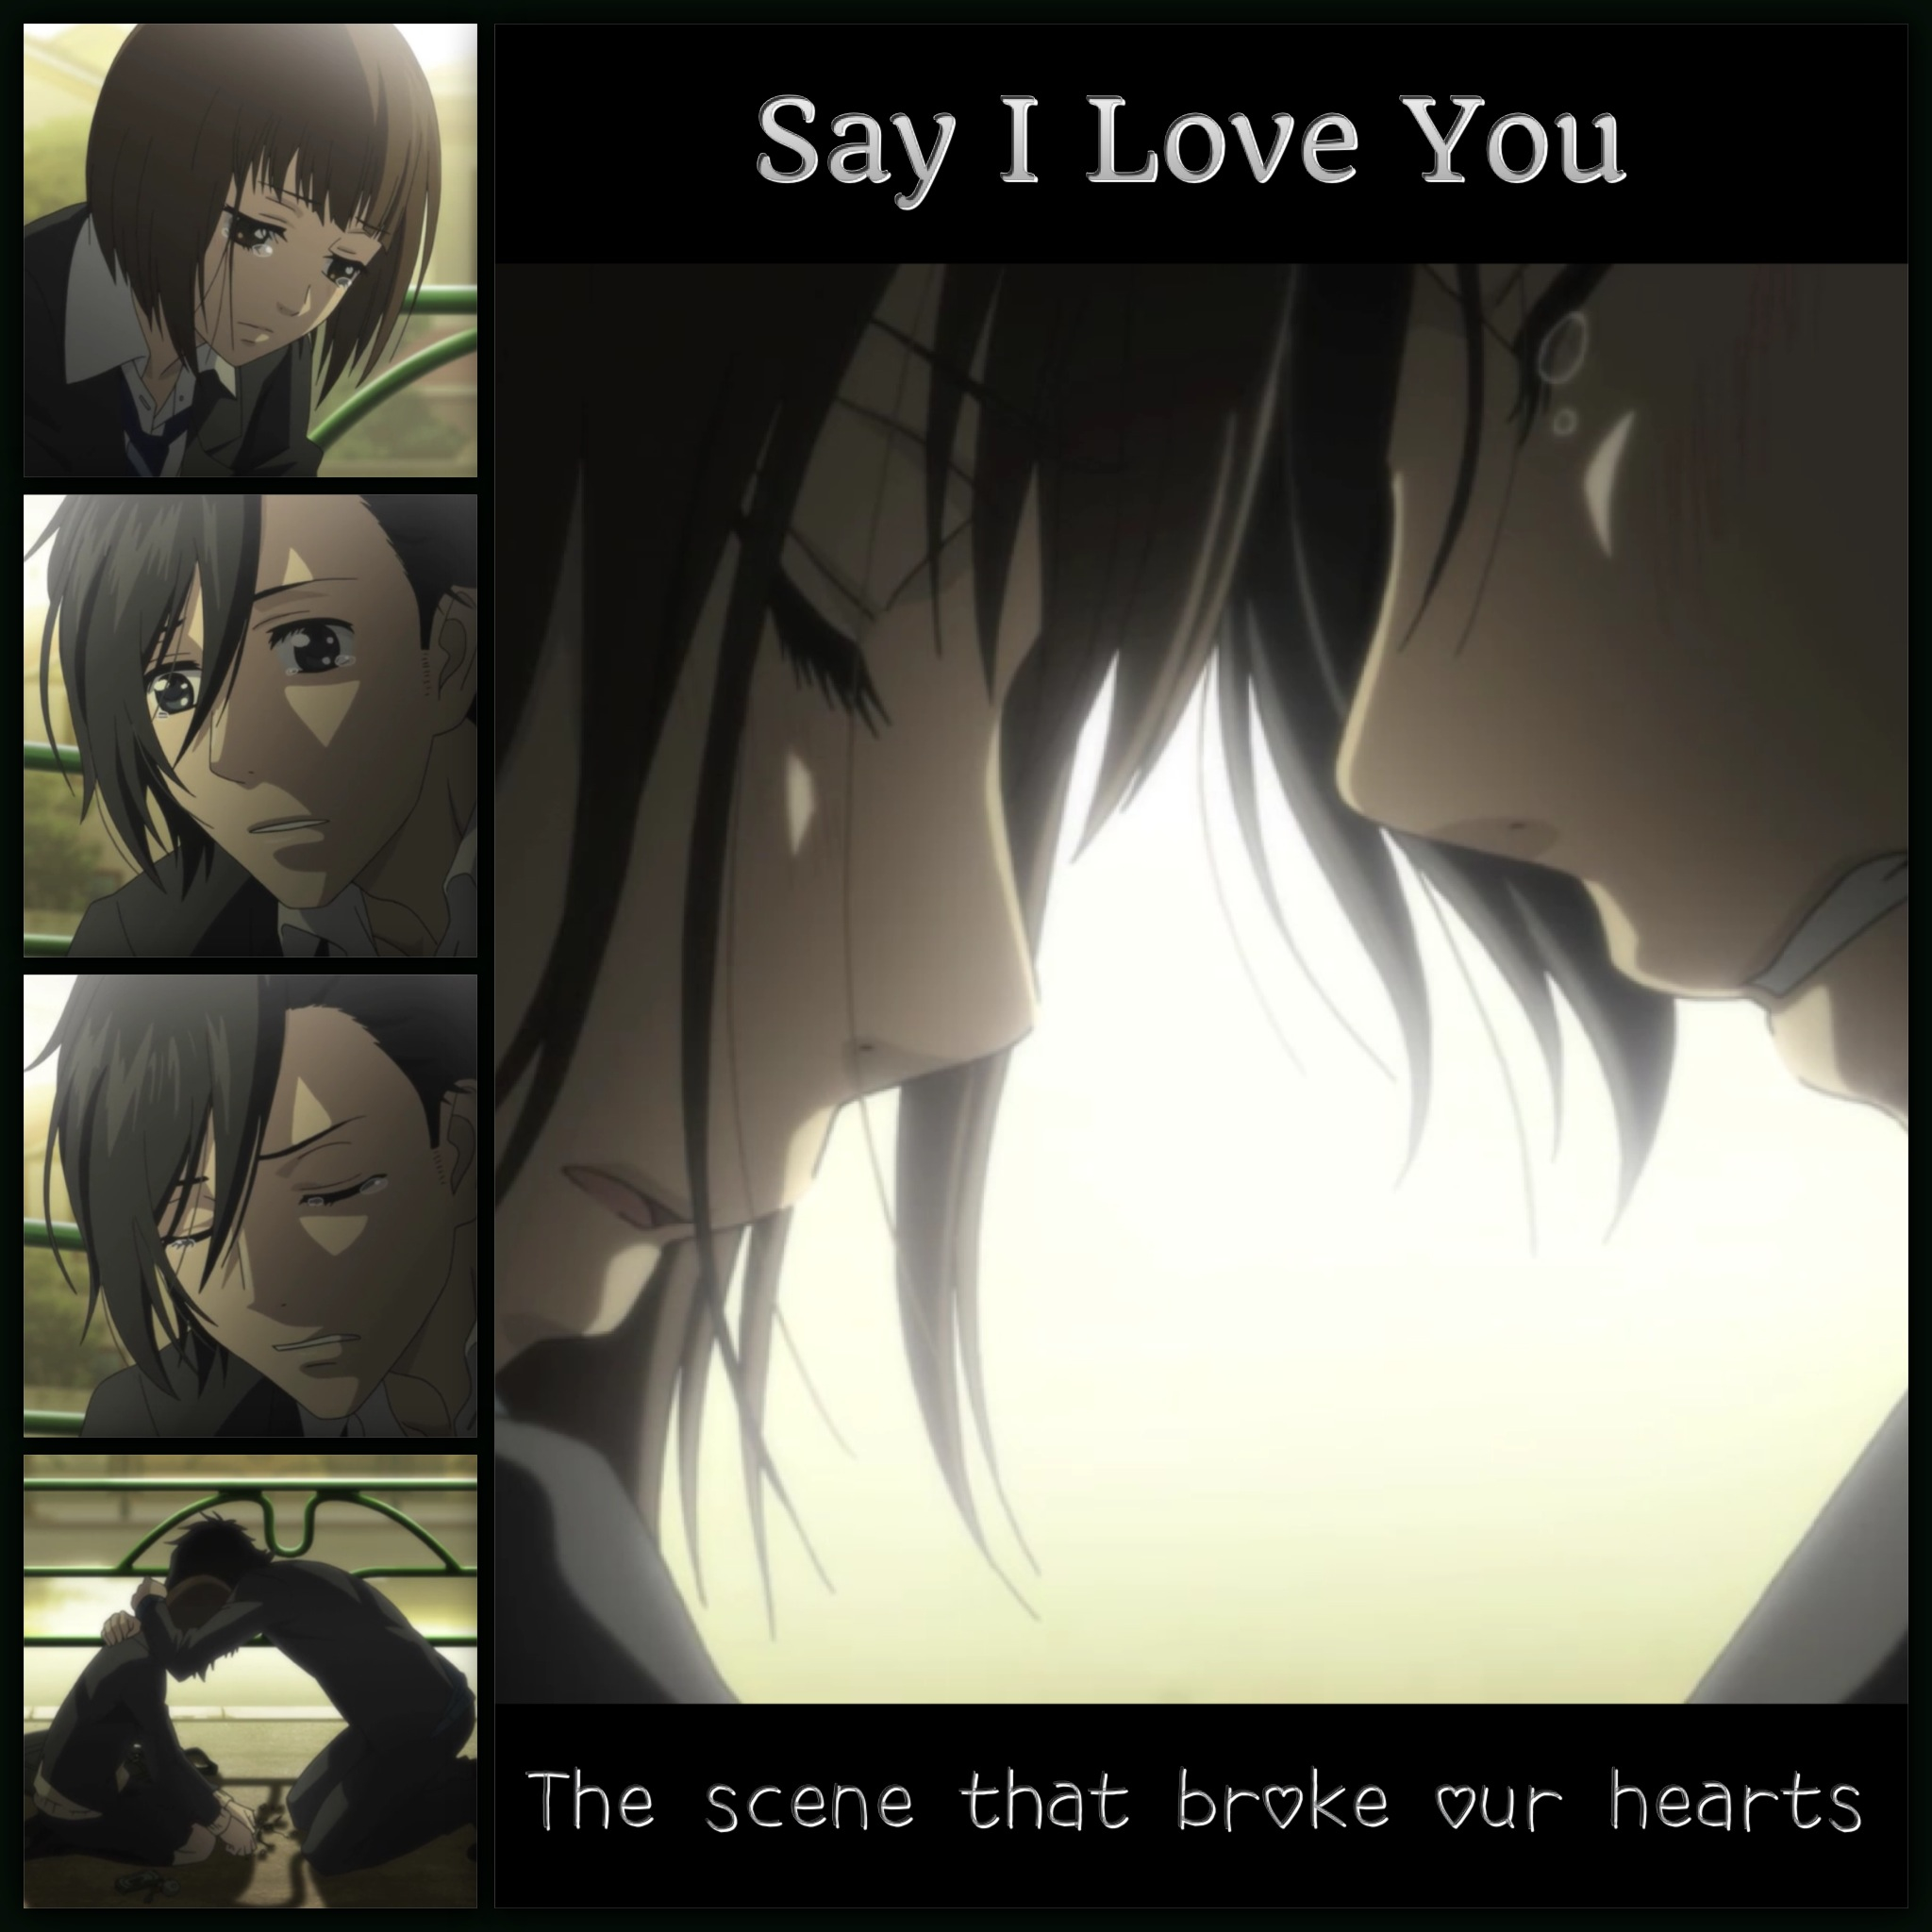 Wallpaper ID 1702397  Say I Love You 1080P Anime free download